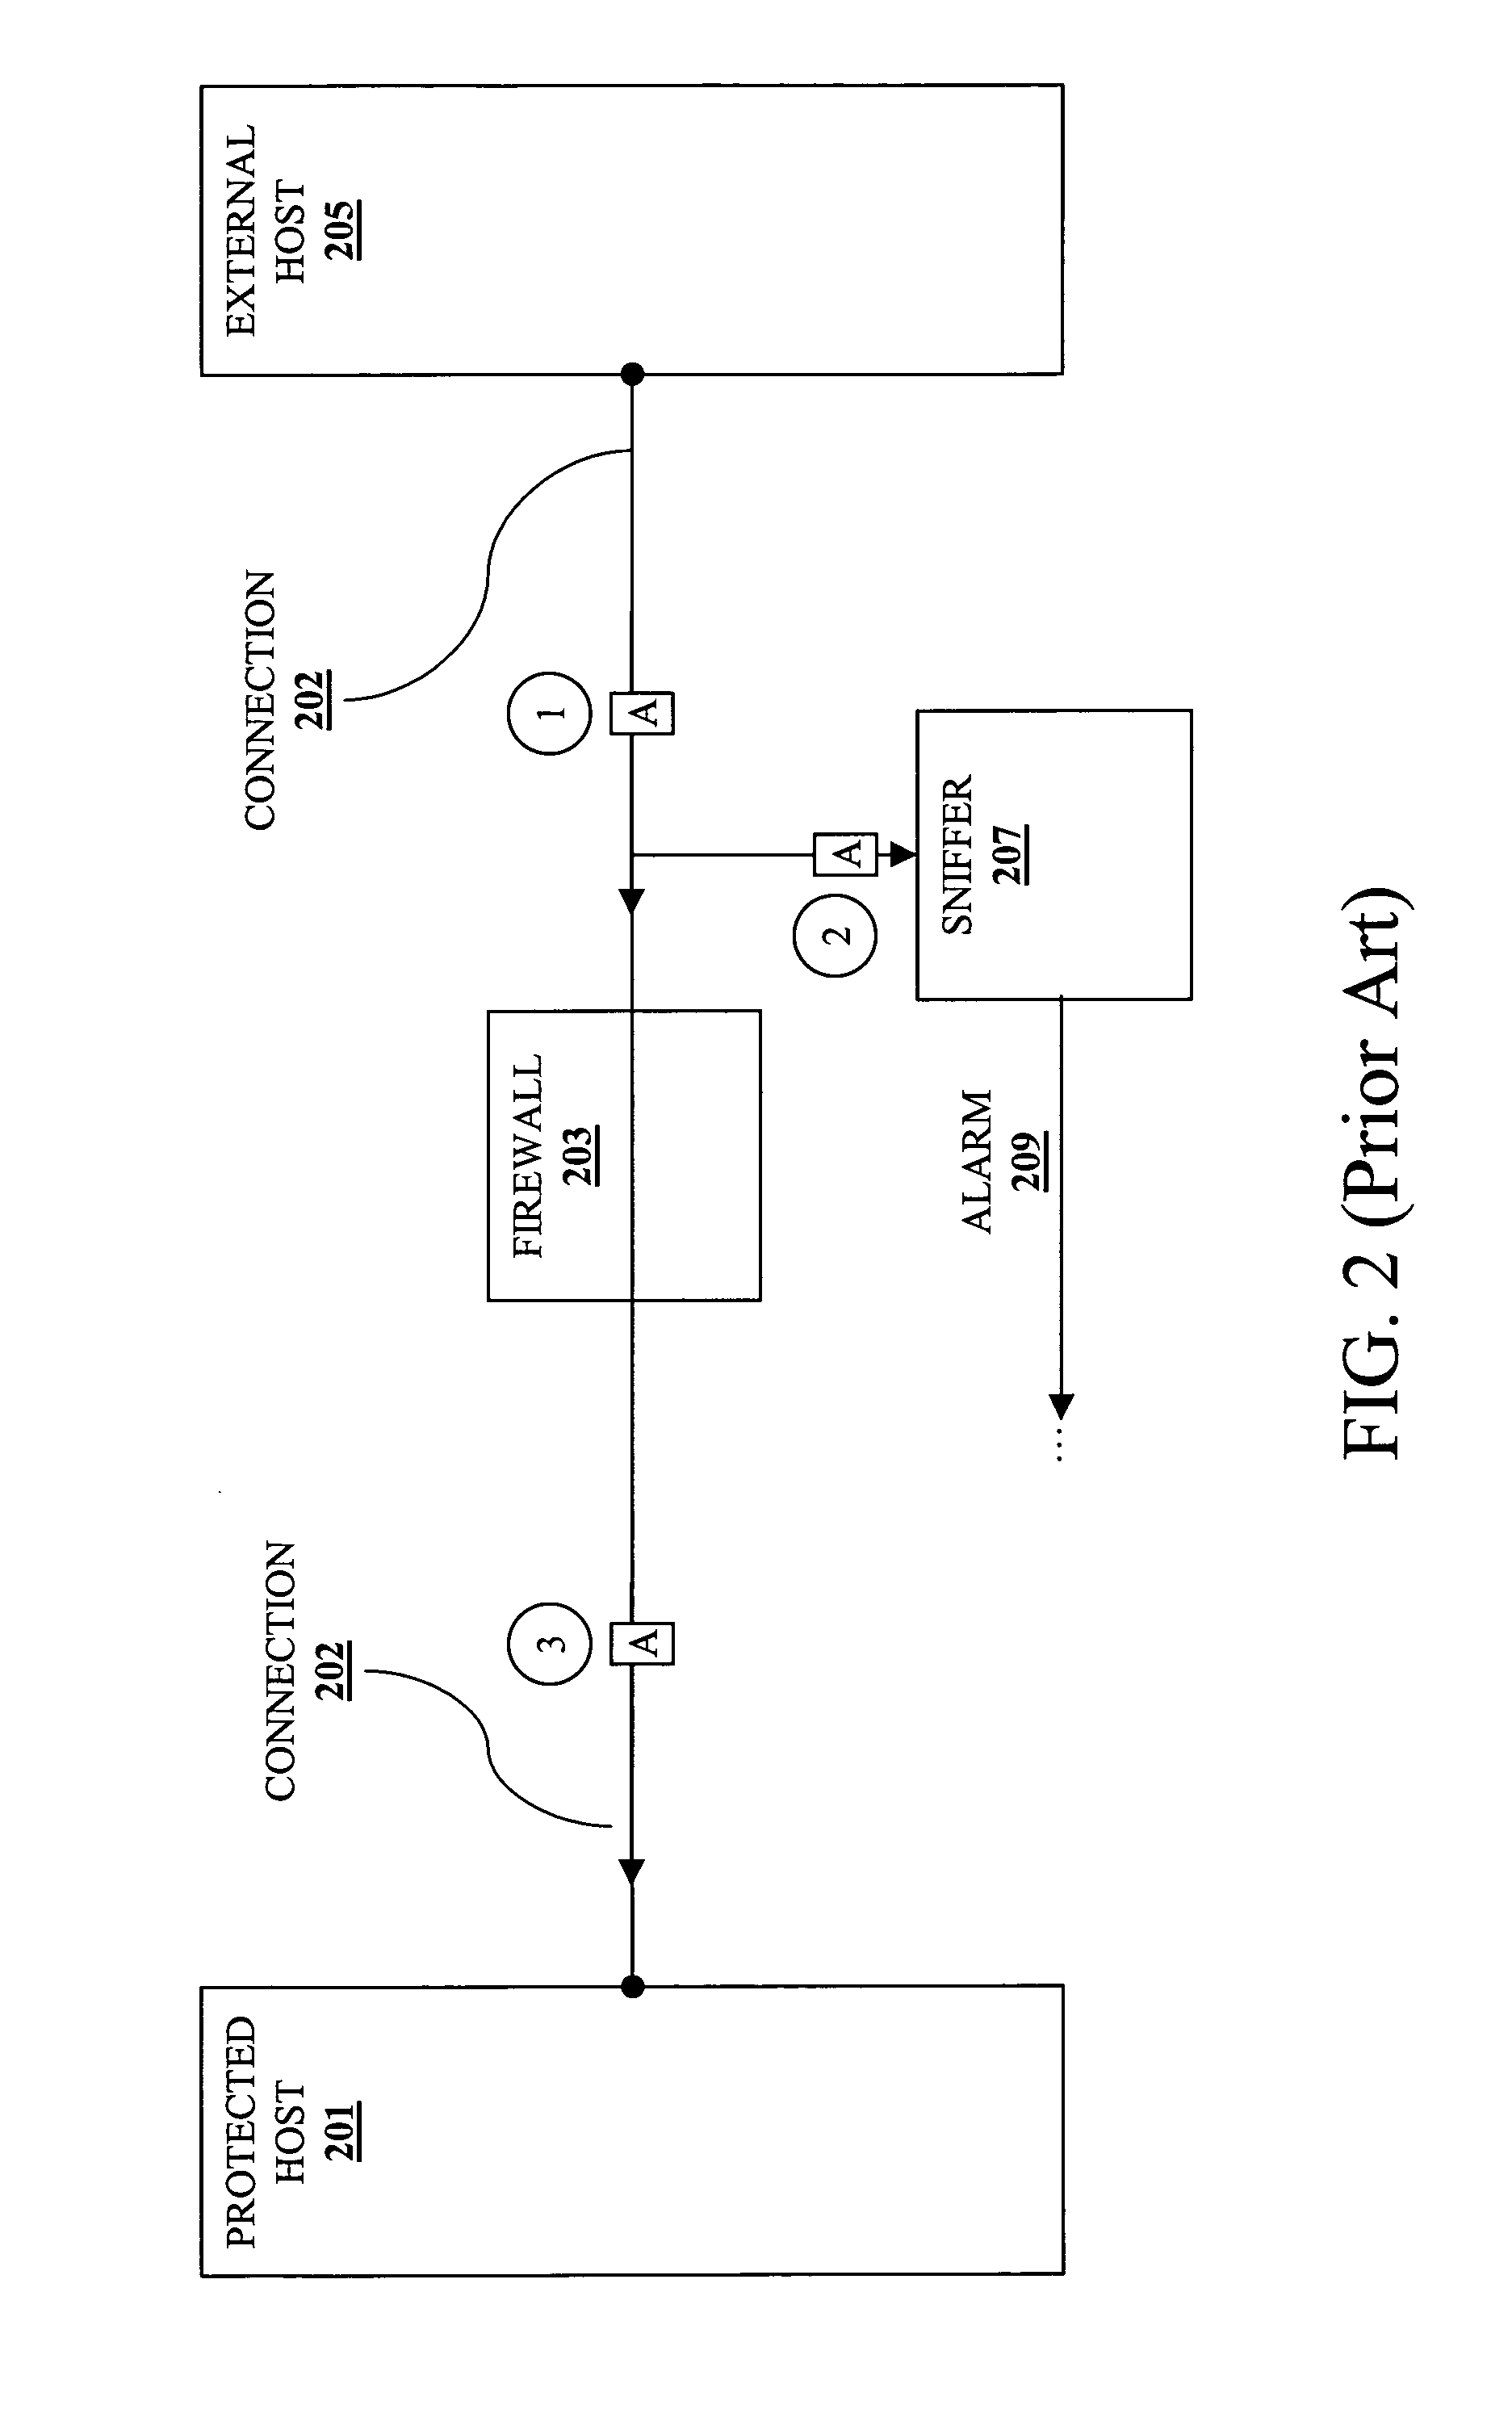 Method and apparatus for datastream analysis and blocking